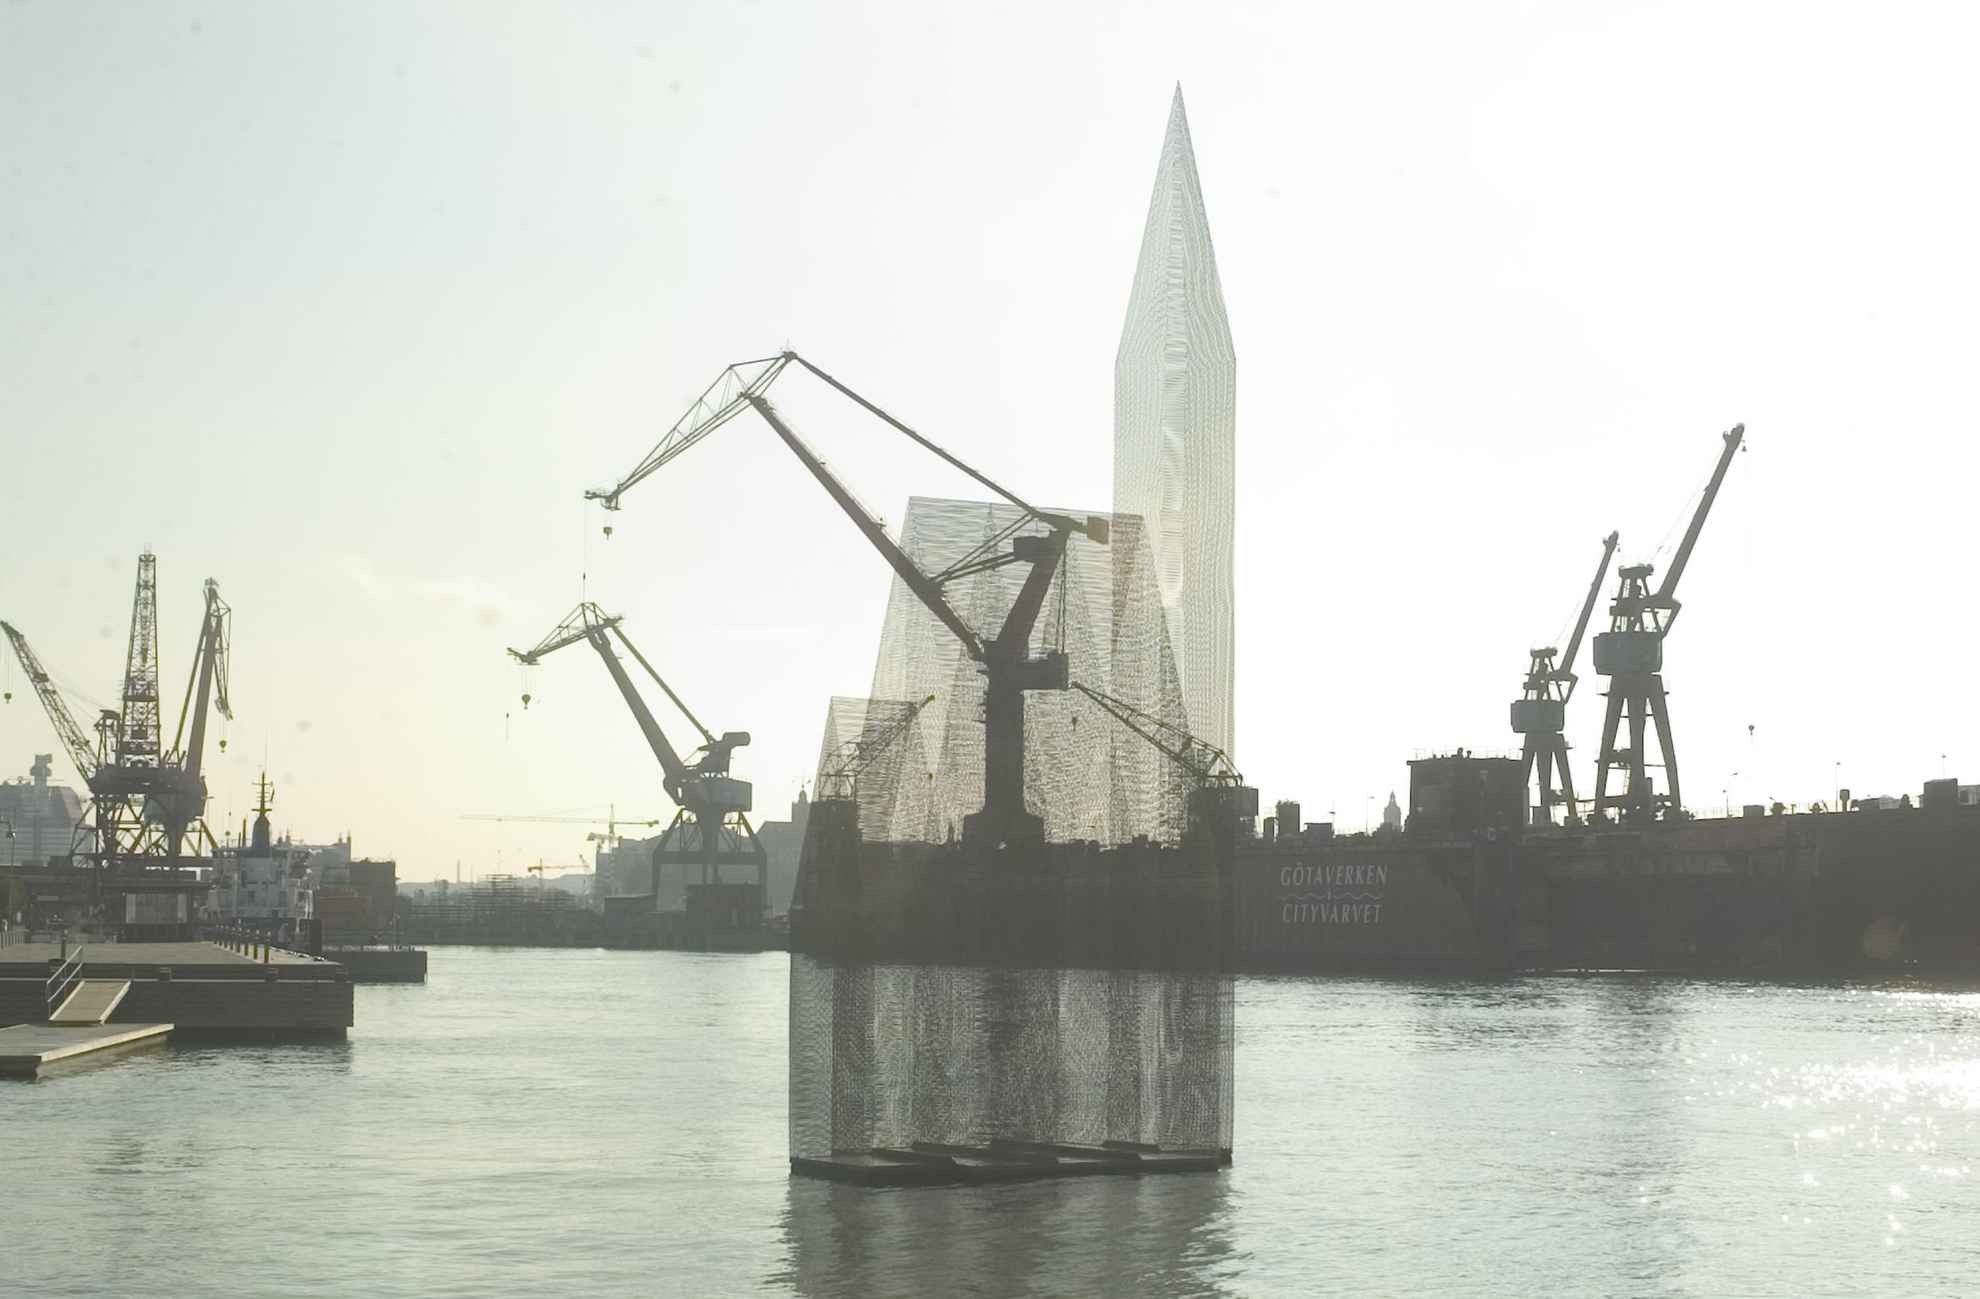 A transparent church-like sculpture called ‘Temple of Doubt and Hope’ floats on the water in in Gothenburg harbour basin. Several construction cranes is seen in the background.